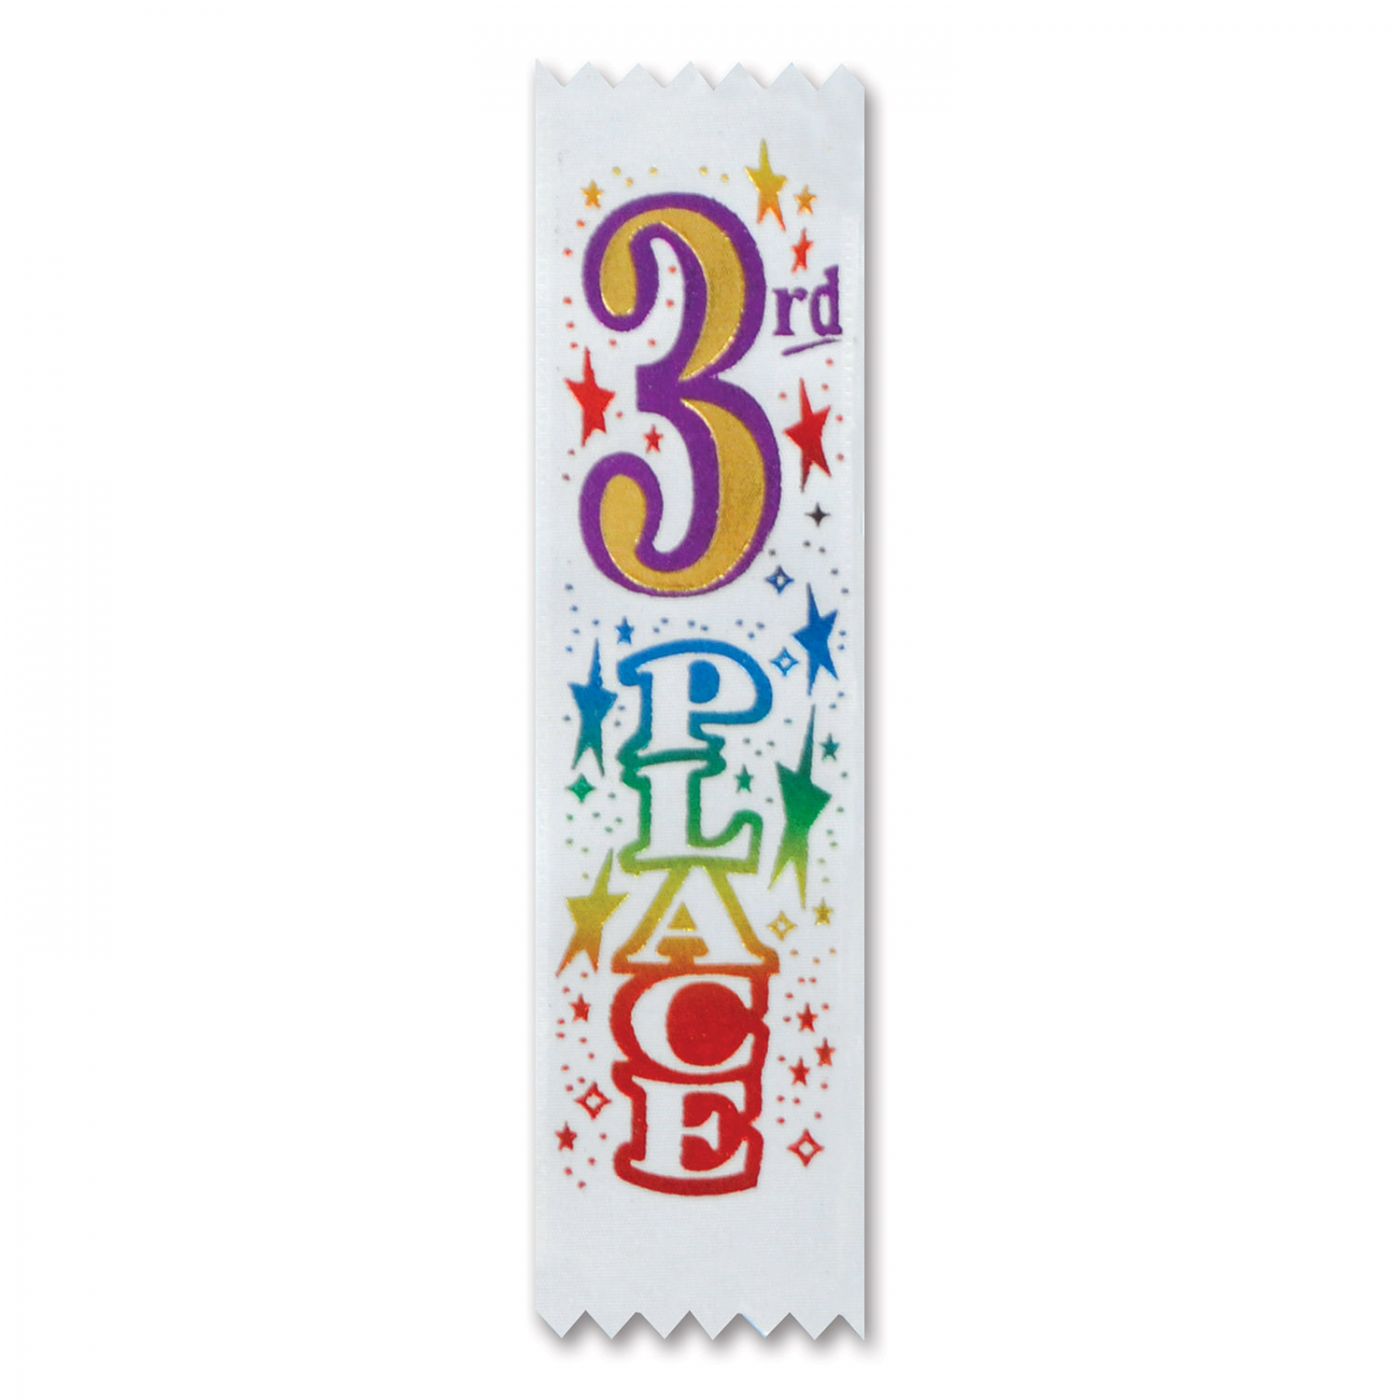 3rd Place Value Pack Ribbons (3) image